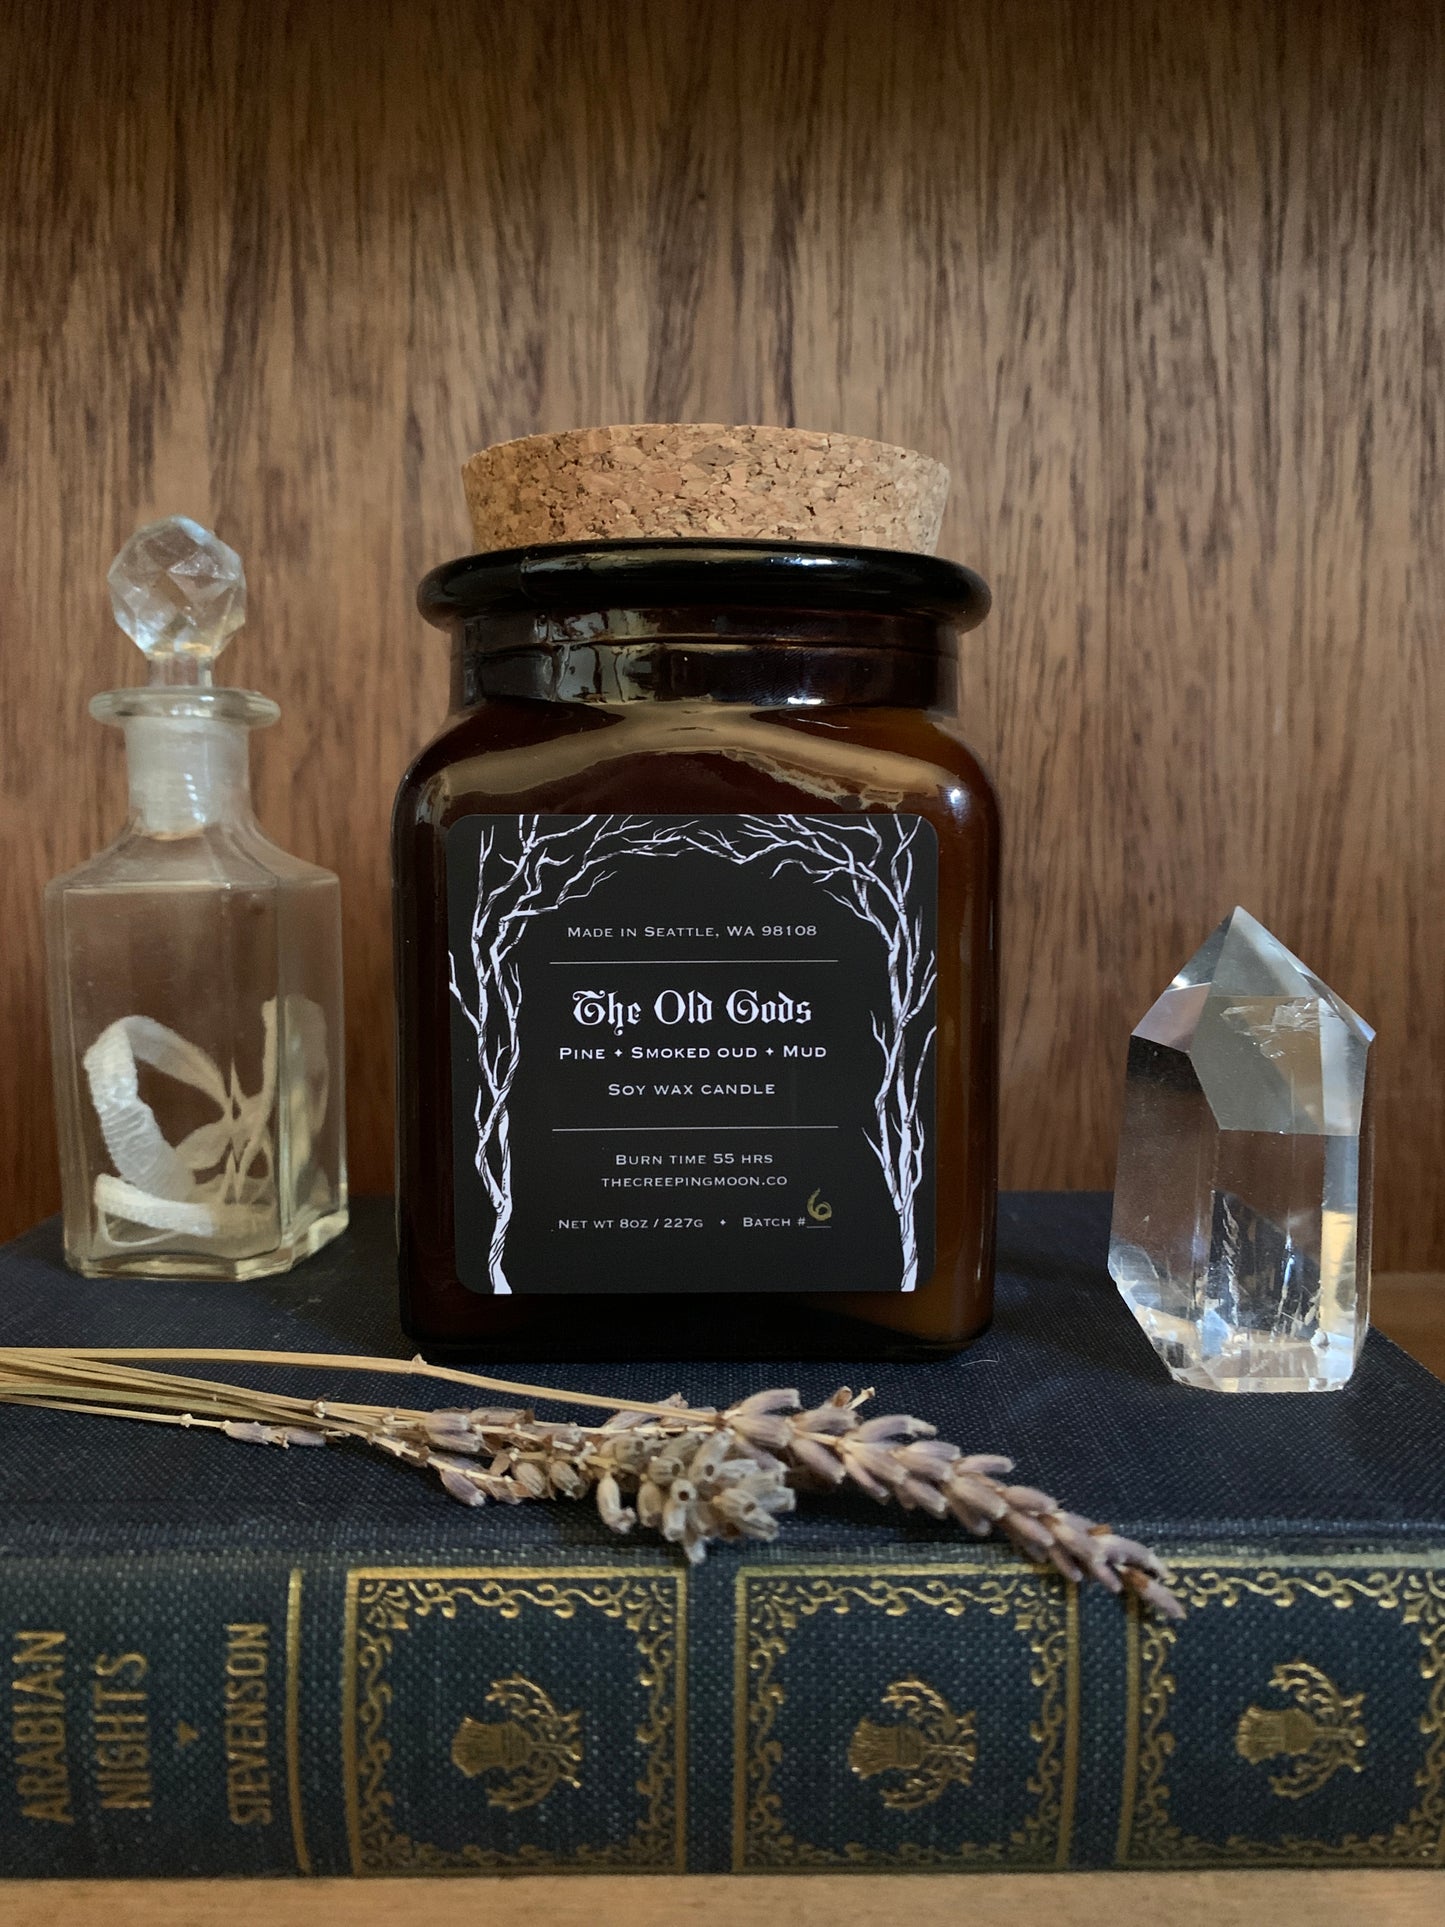 The Old Gods 8oz soy candle